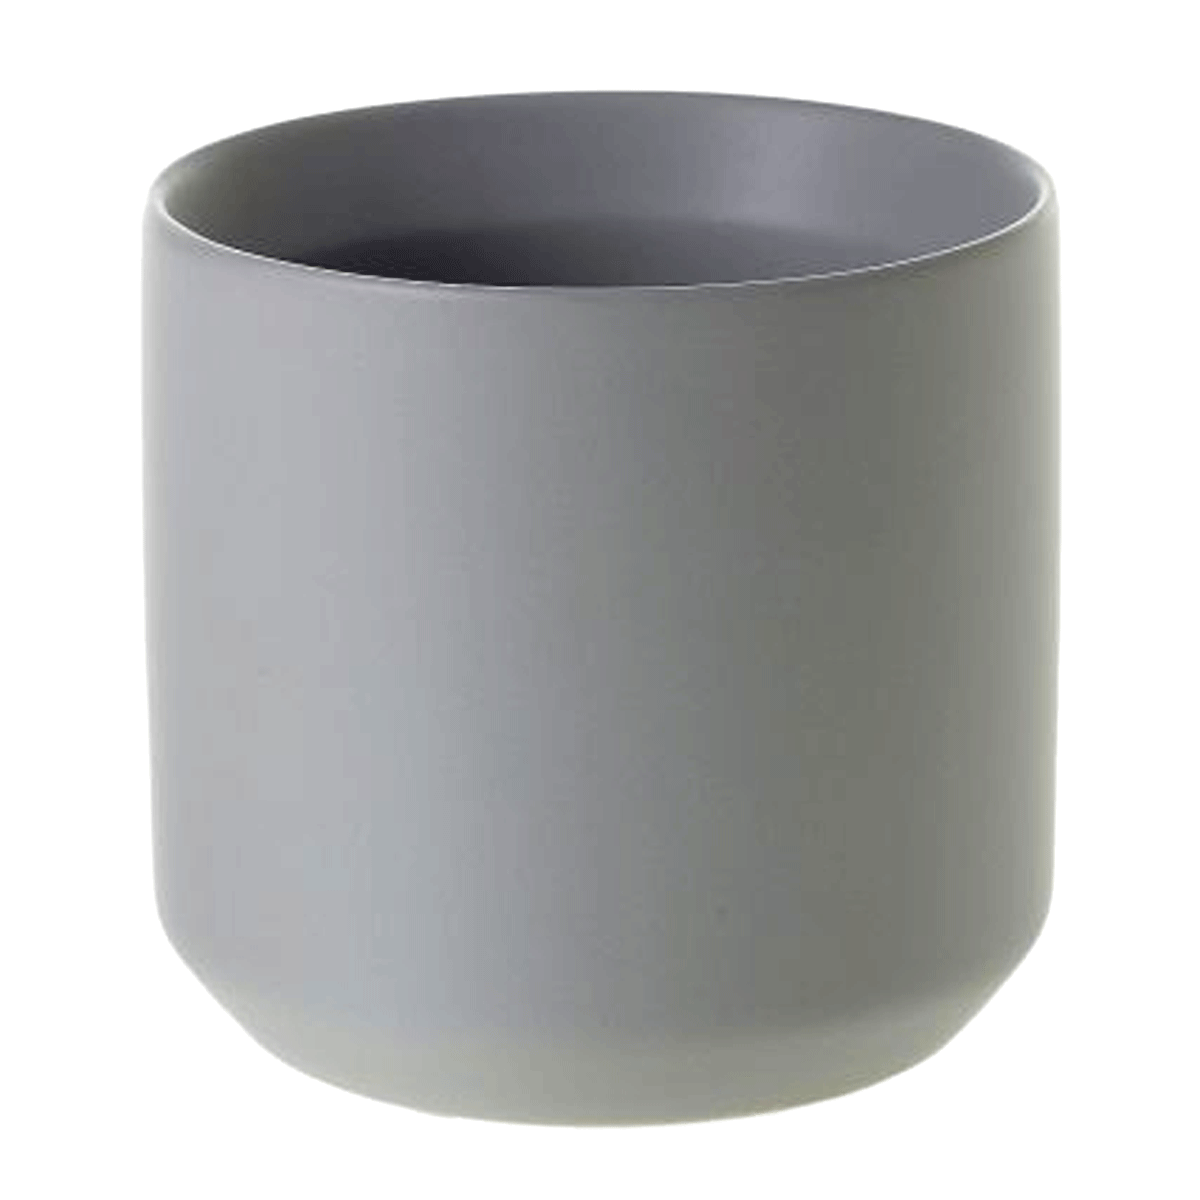 Gray Minimalistic Pot for sale, Gray Cactus Ceramic Pot, Modern Pot Decor for Home or Office, High Quality Ceramic Pot for Plants and Flowers, Modern Style Indoor Ceramic Planter